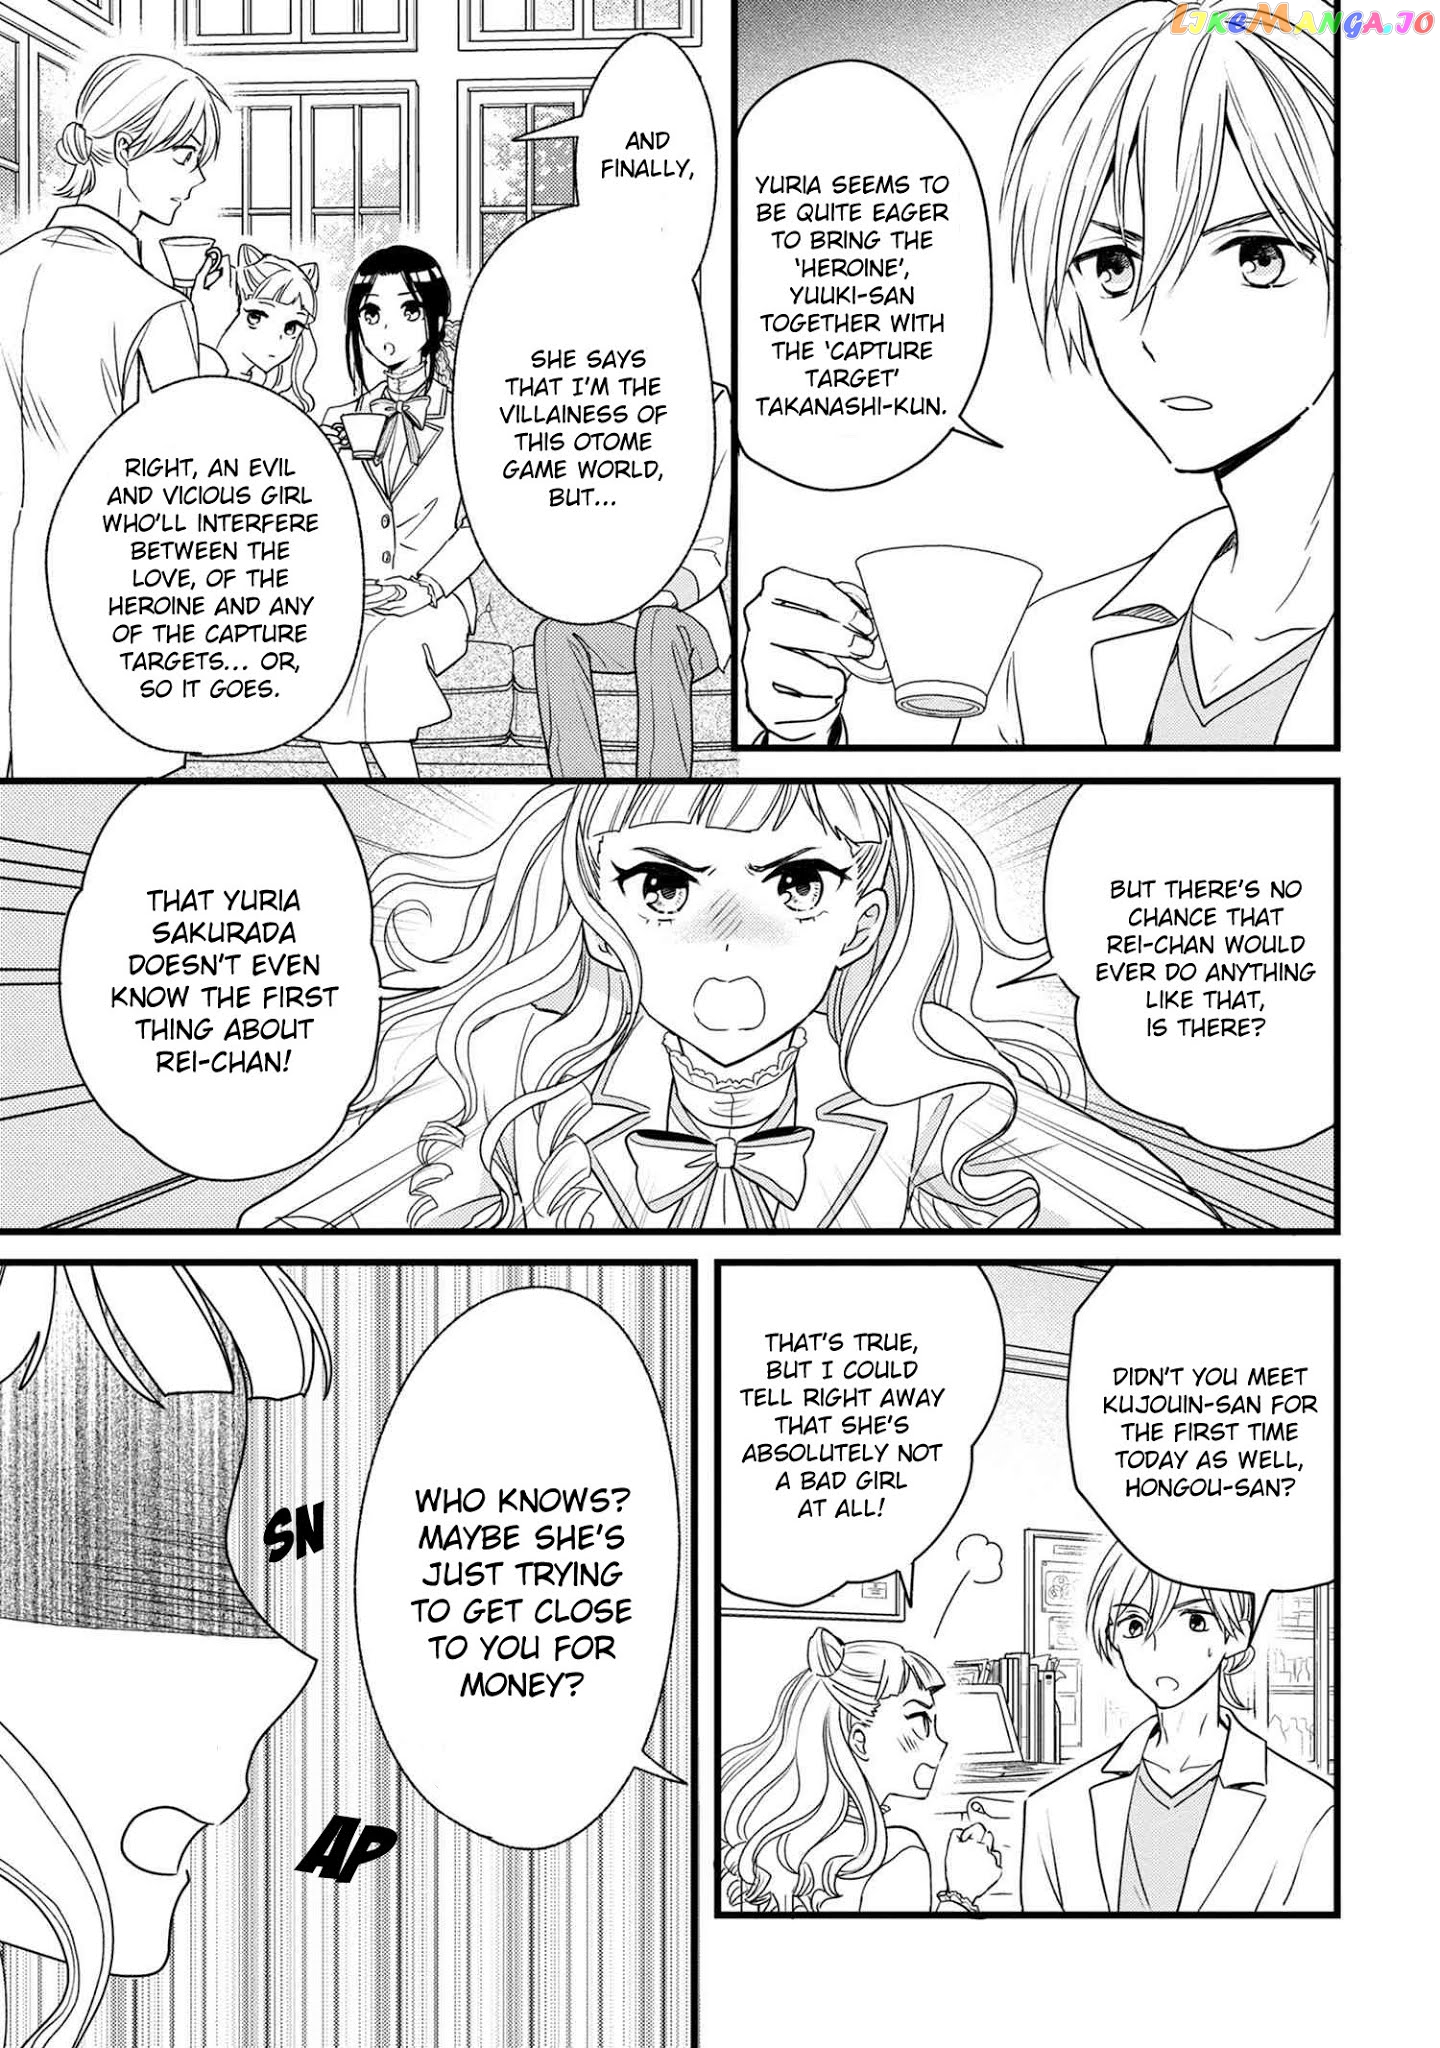 Reiko's Style: Despite Being Mistaken For A Rich Villainess, She's Actually Just Penniless chapter 3 - page 14